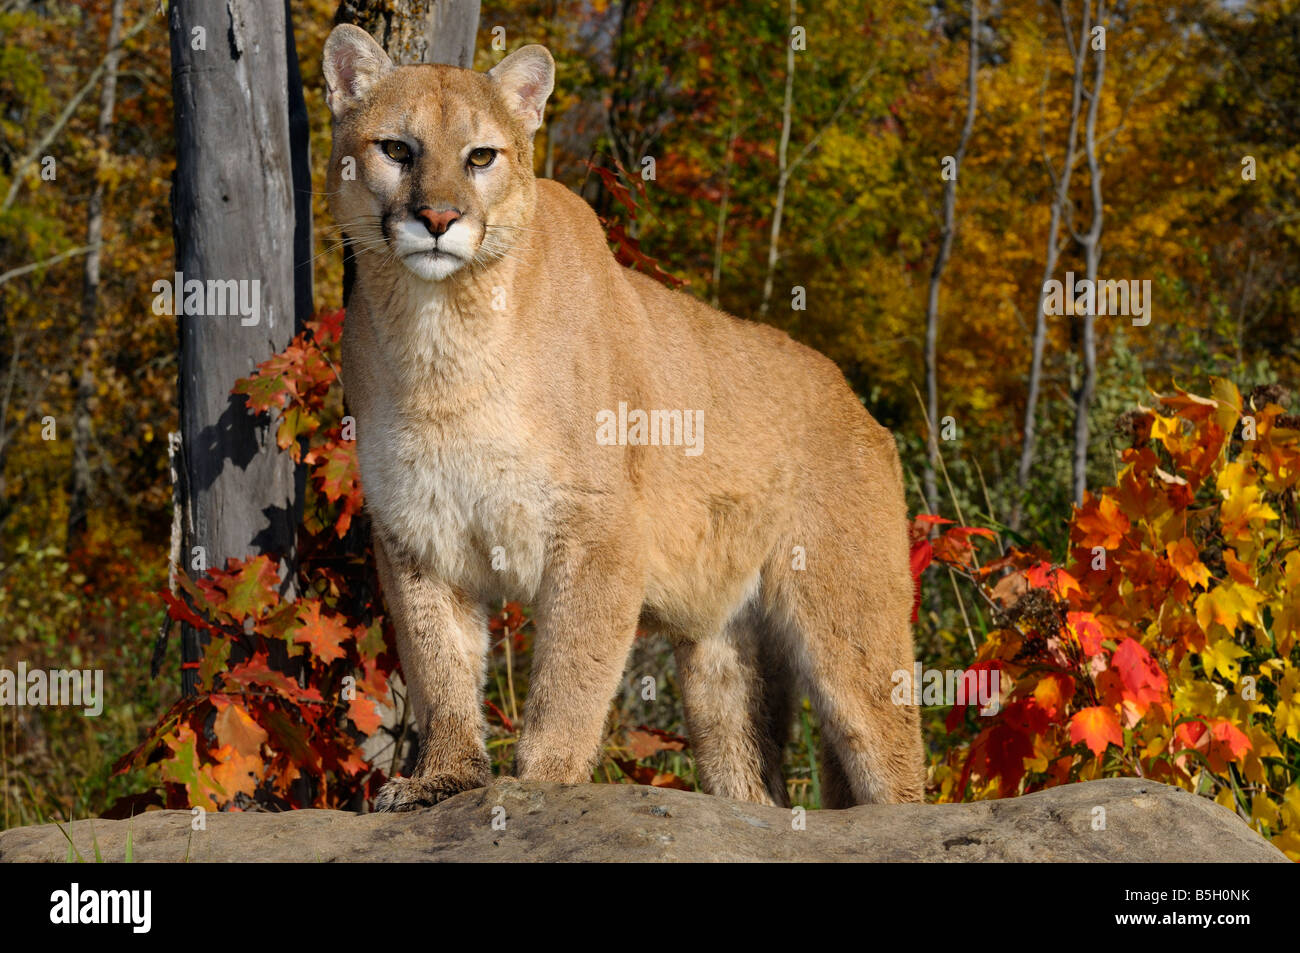 Cougar staring while standing on a rock in an Autumn forest with red oak and maple leaves Stock Photo